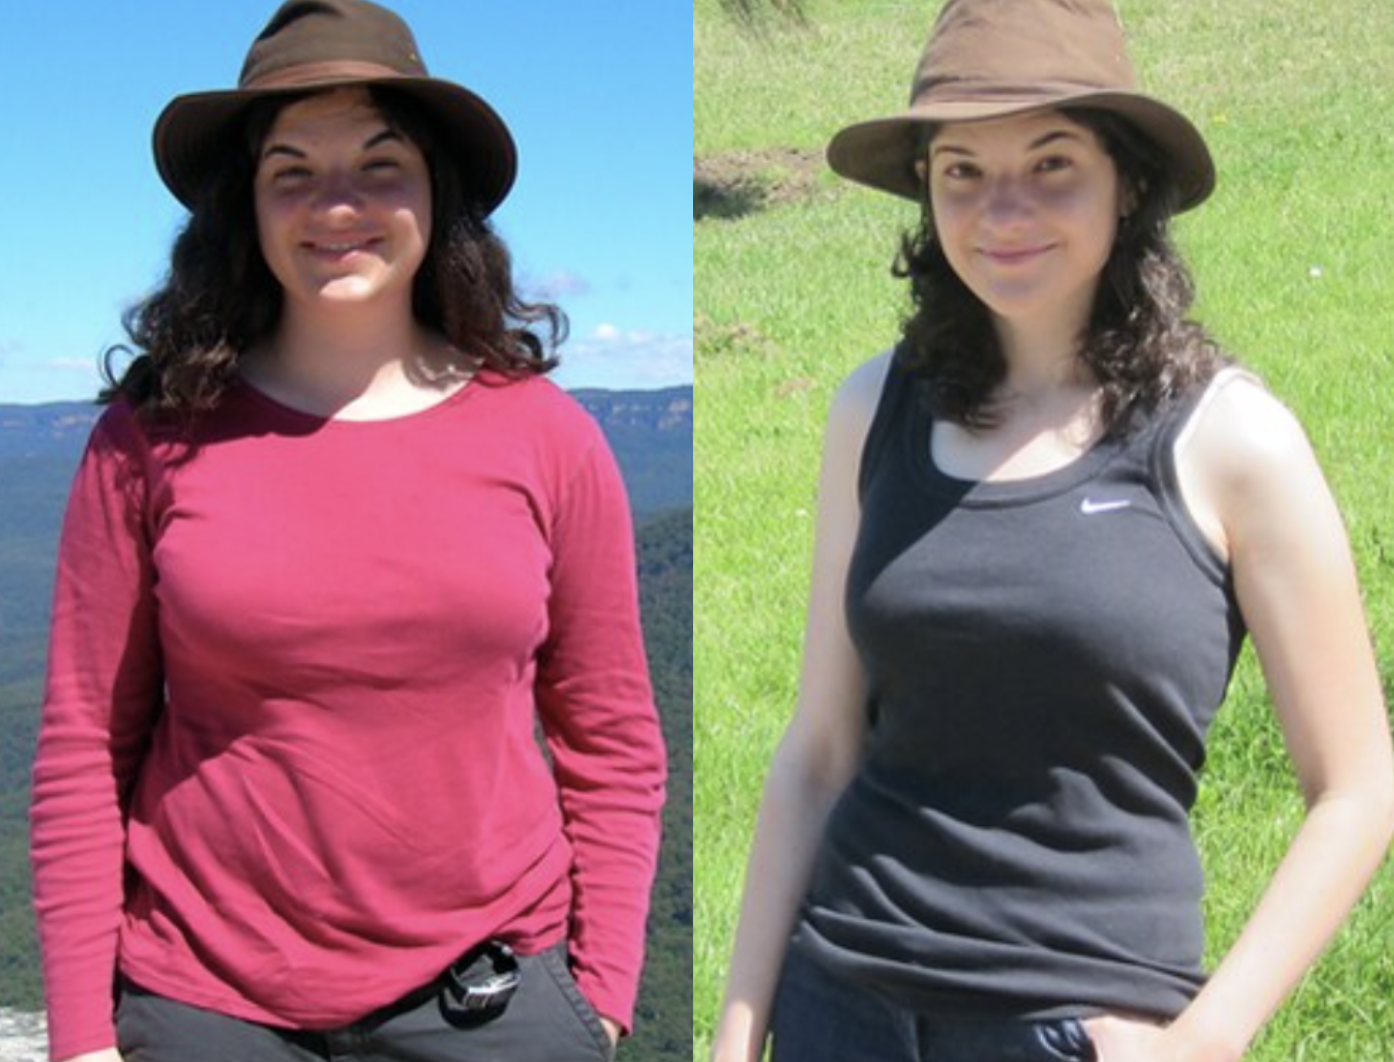 Before and after pictures of a woman who lost weight